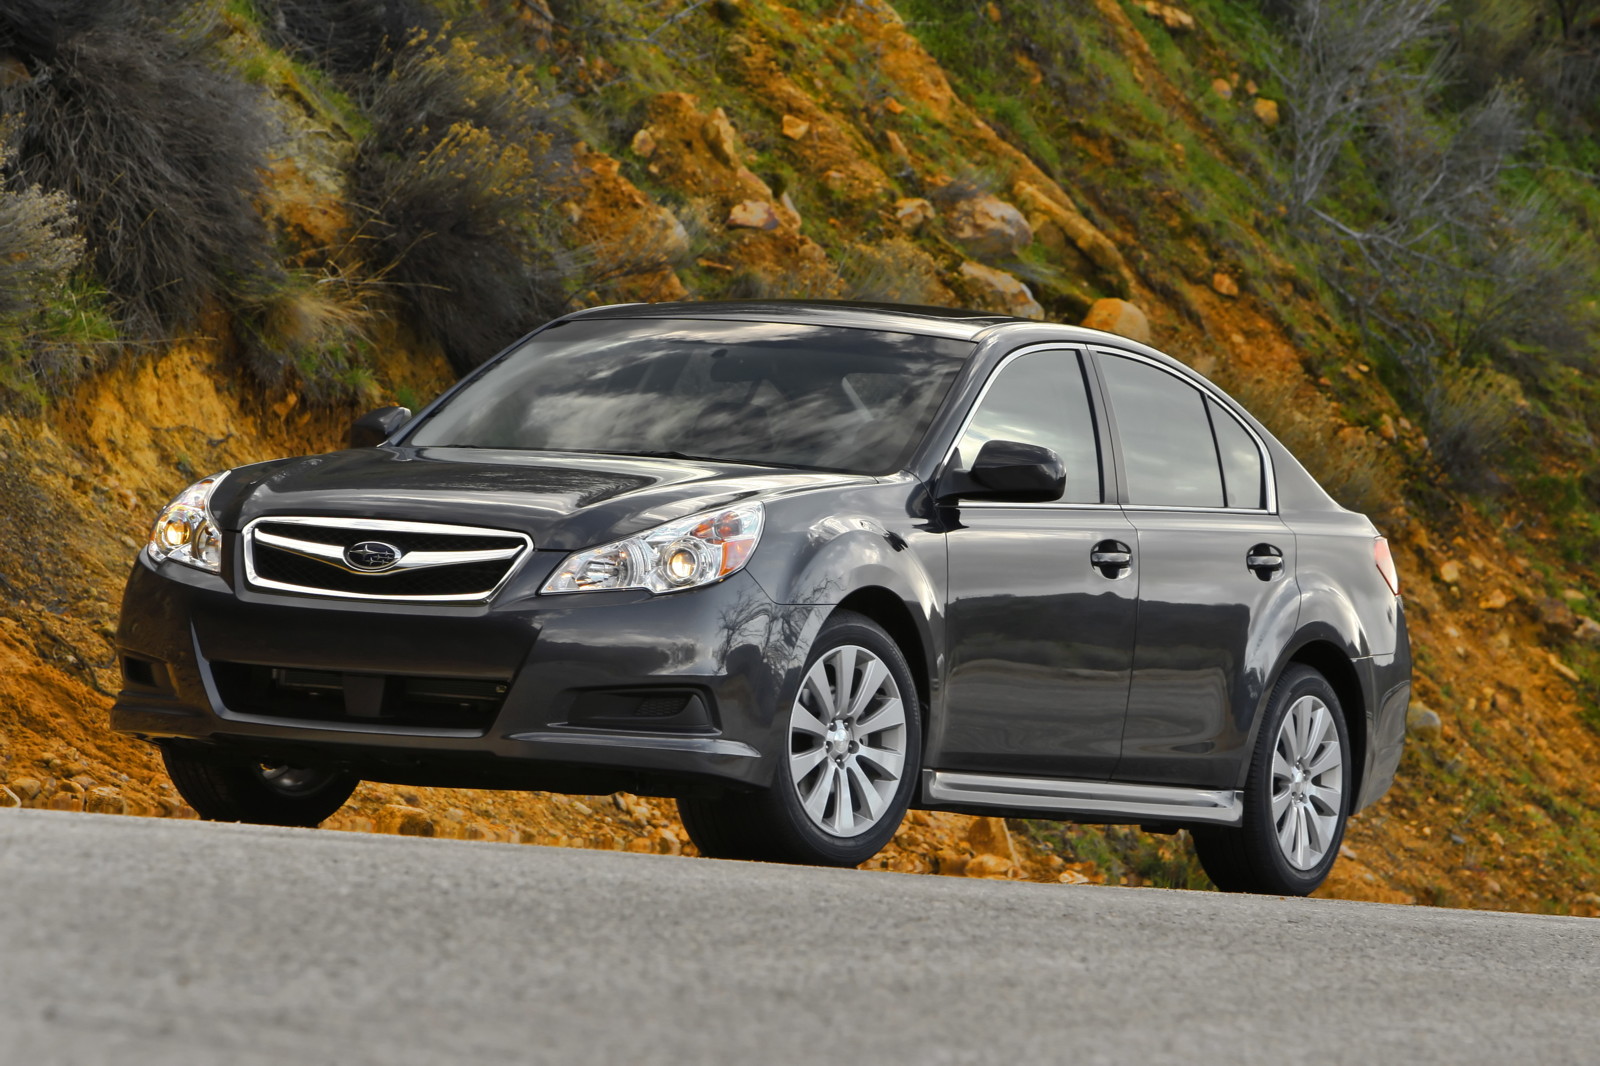 2010 Subaru Legacy Review, Ratings, Specs, Prices, and